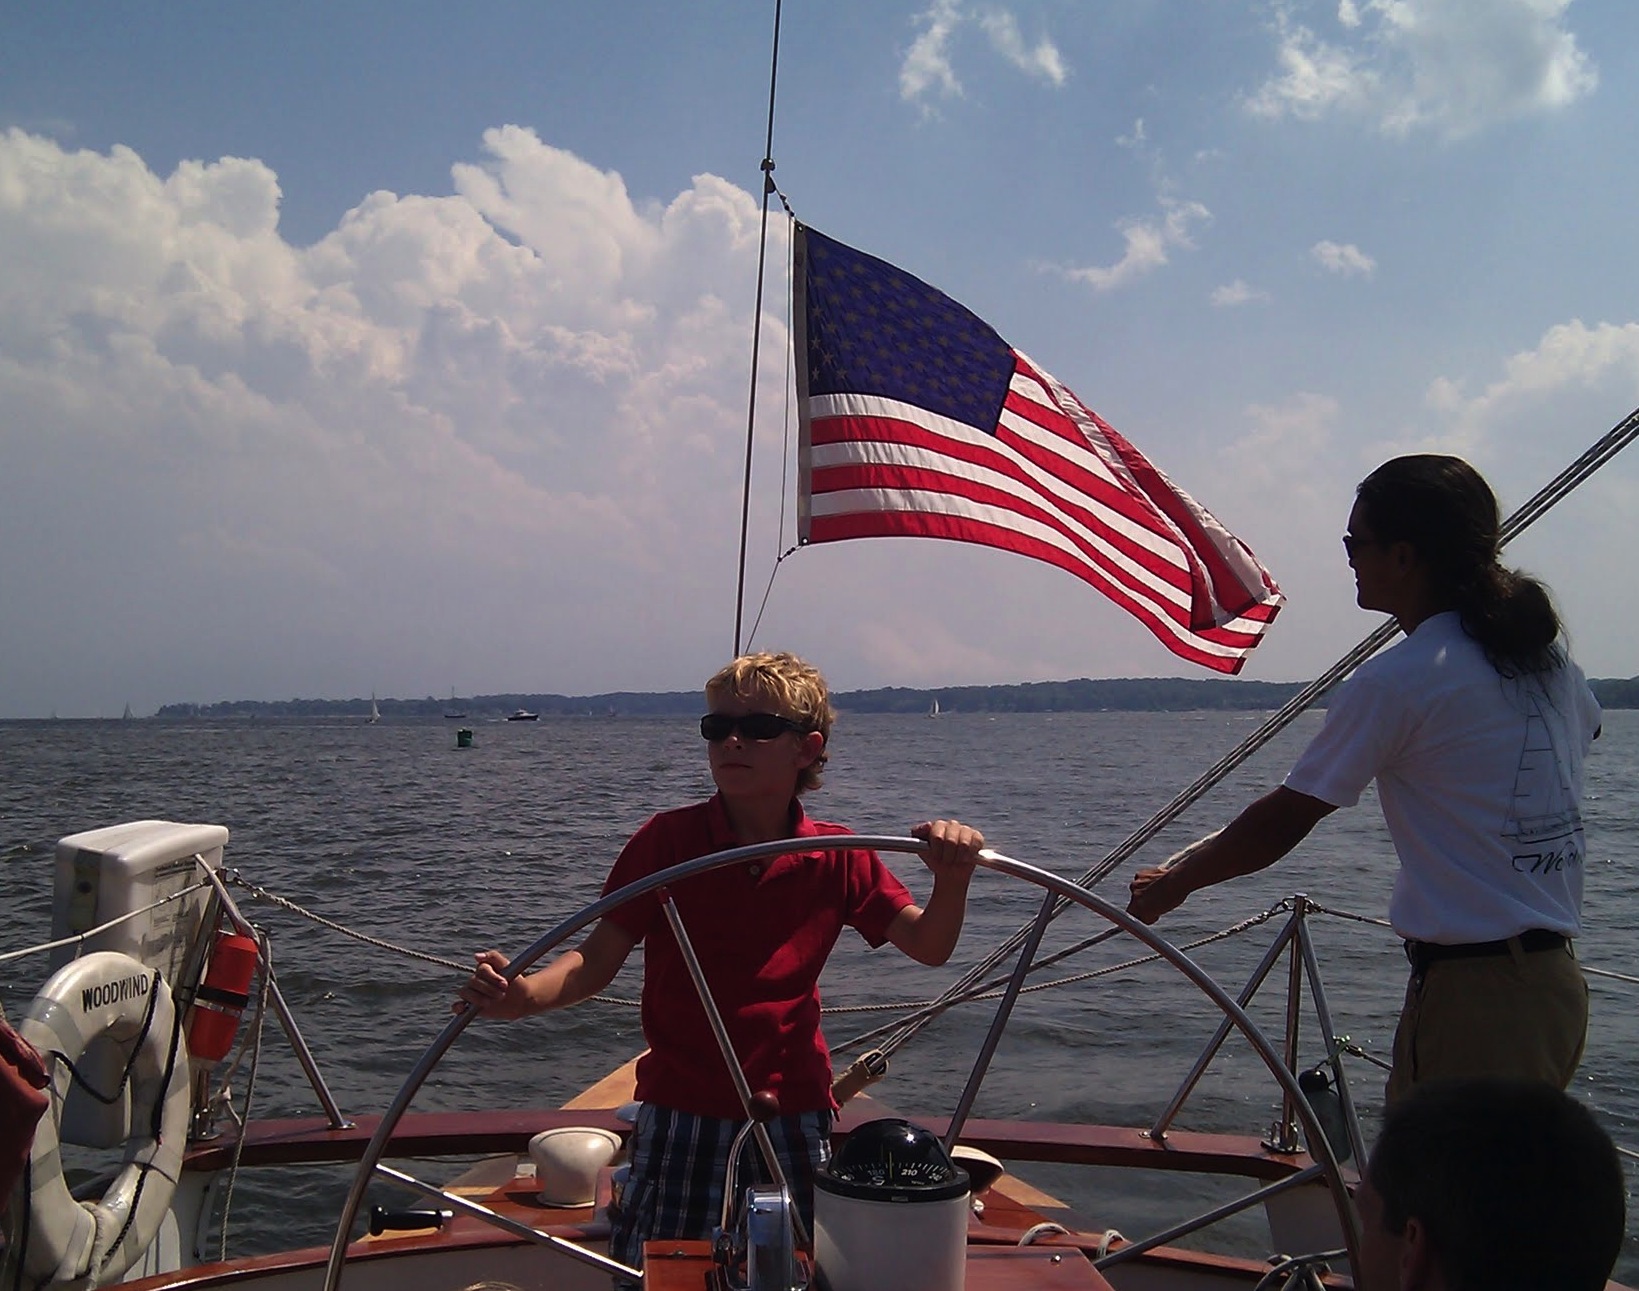 Boy steering the boat in a red shirt and blue and white shorts